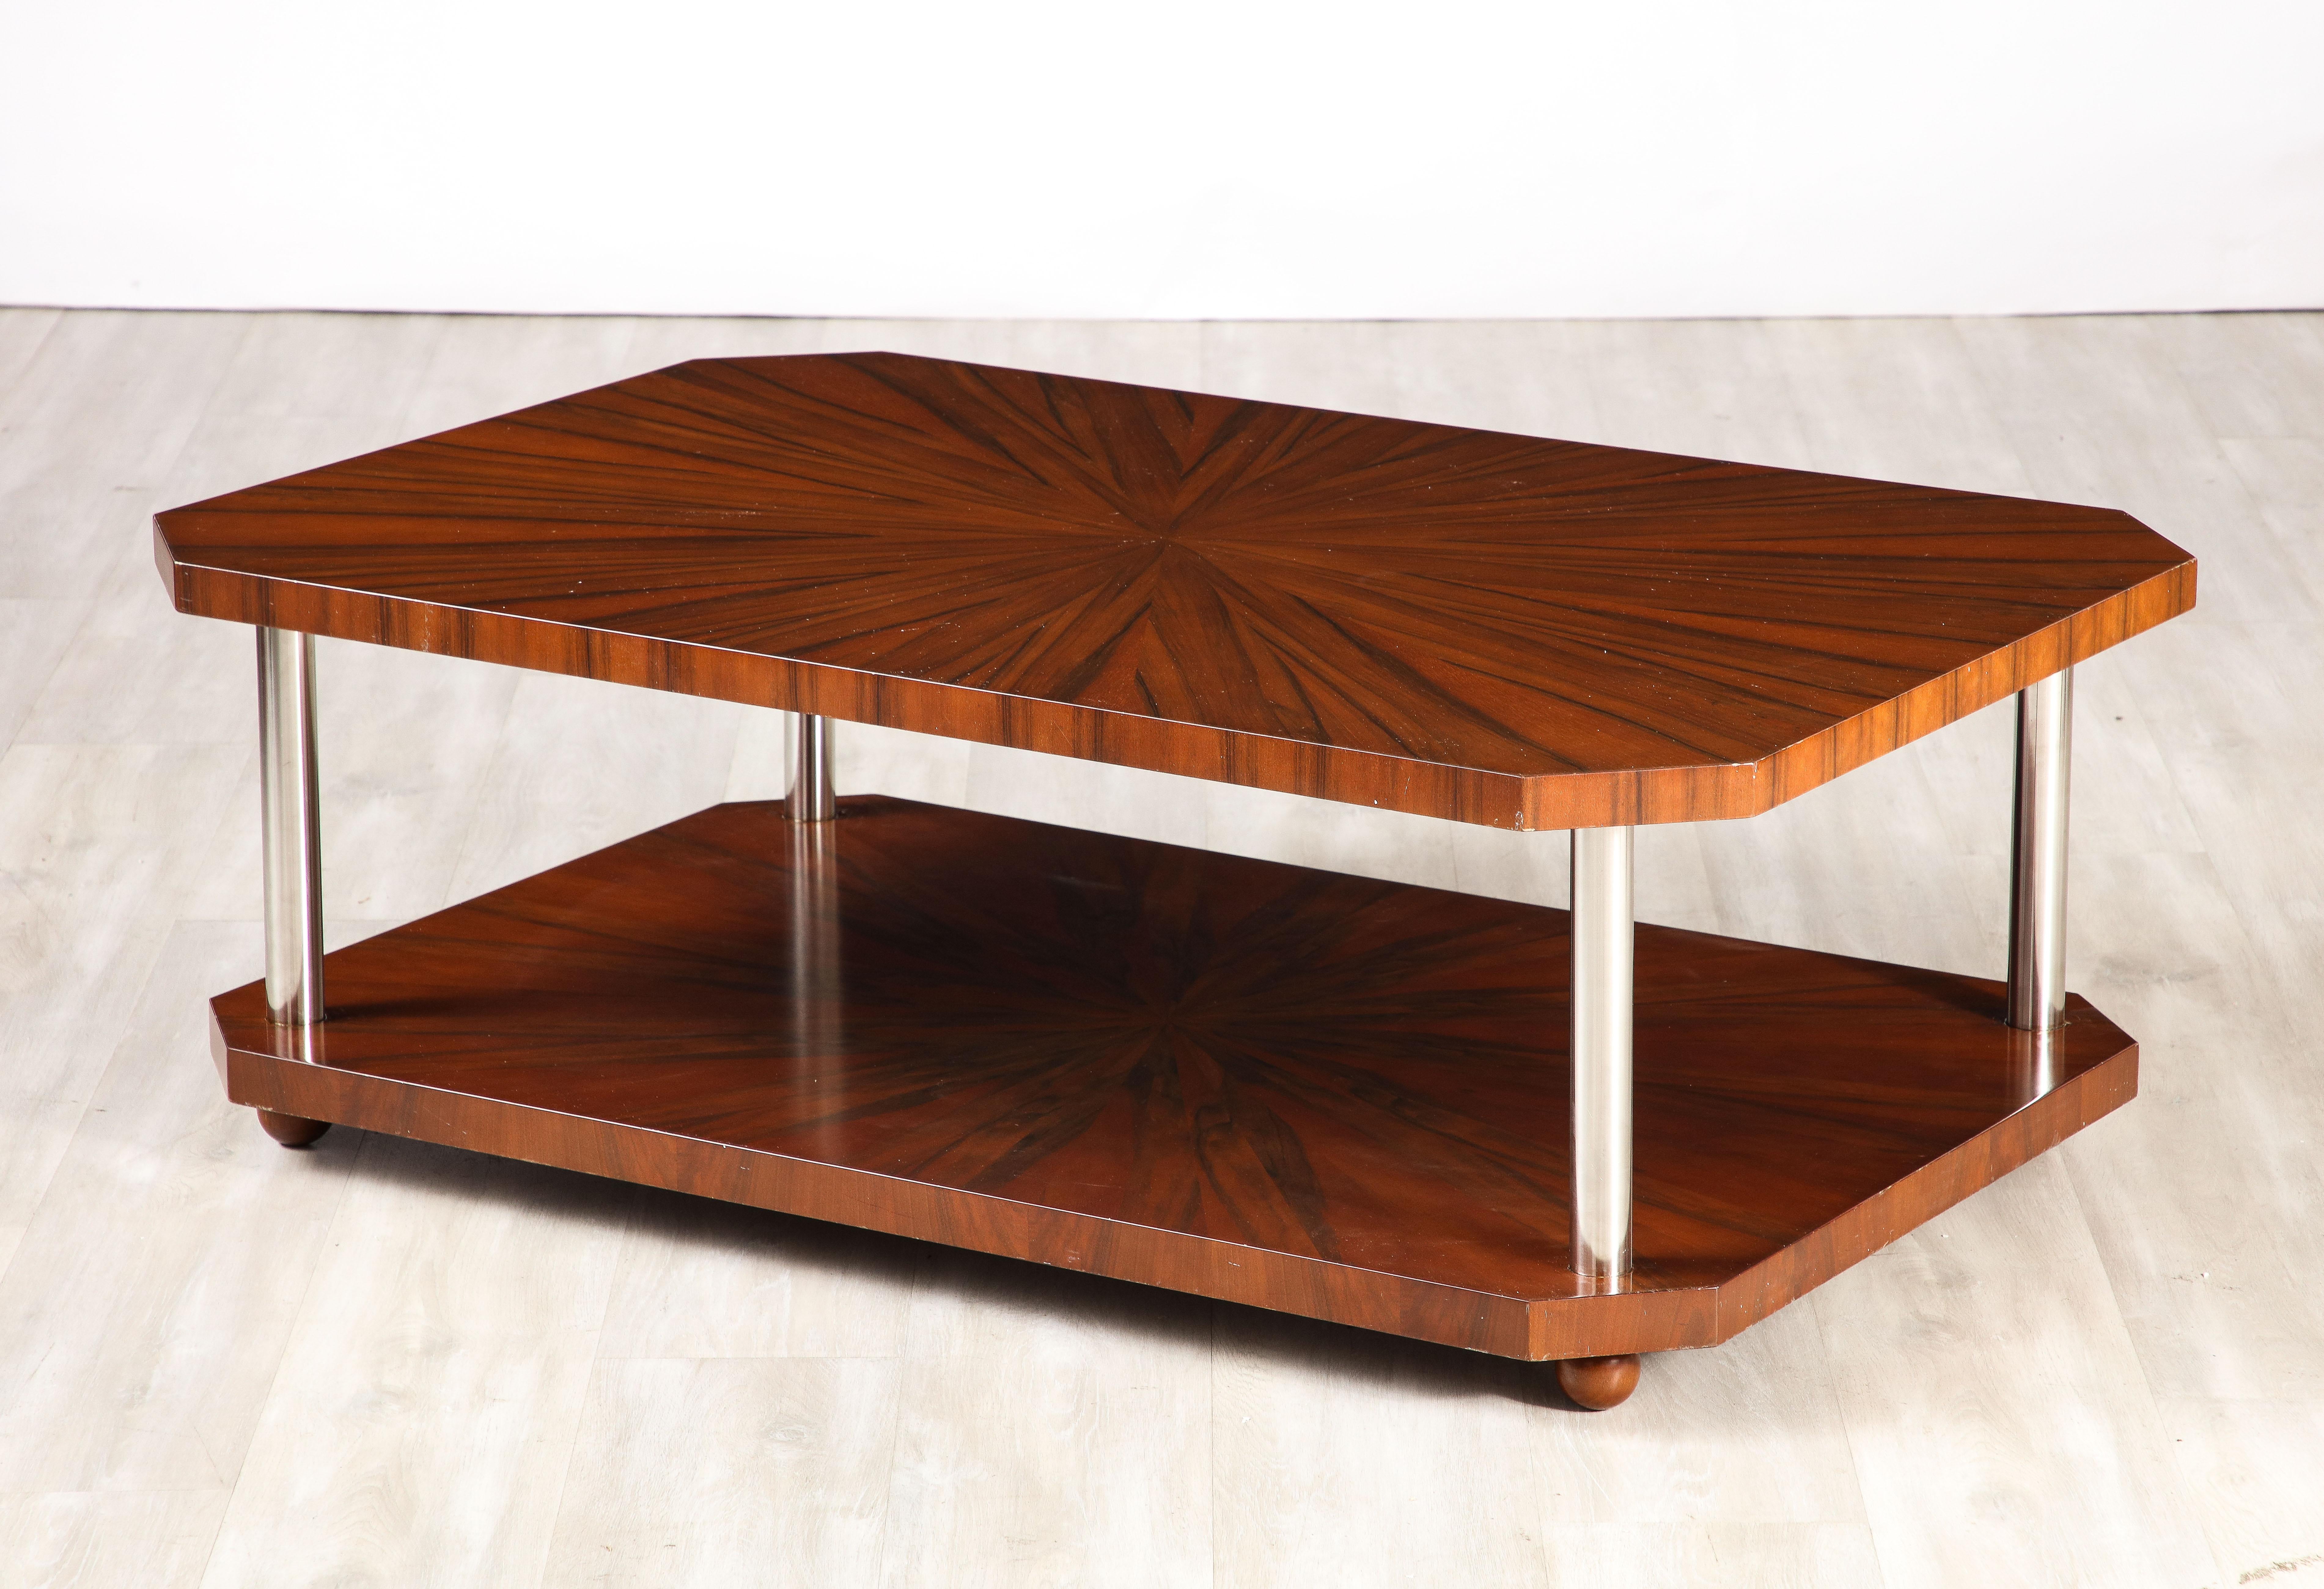 French Art Deco Rectangular Wood Coffee Table, circa 1940  For Sale 1